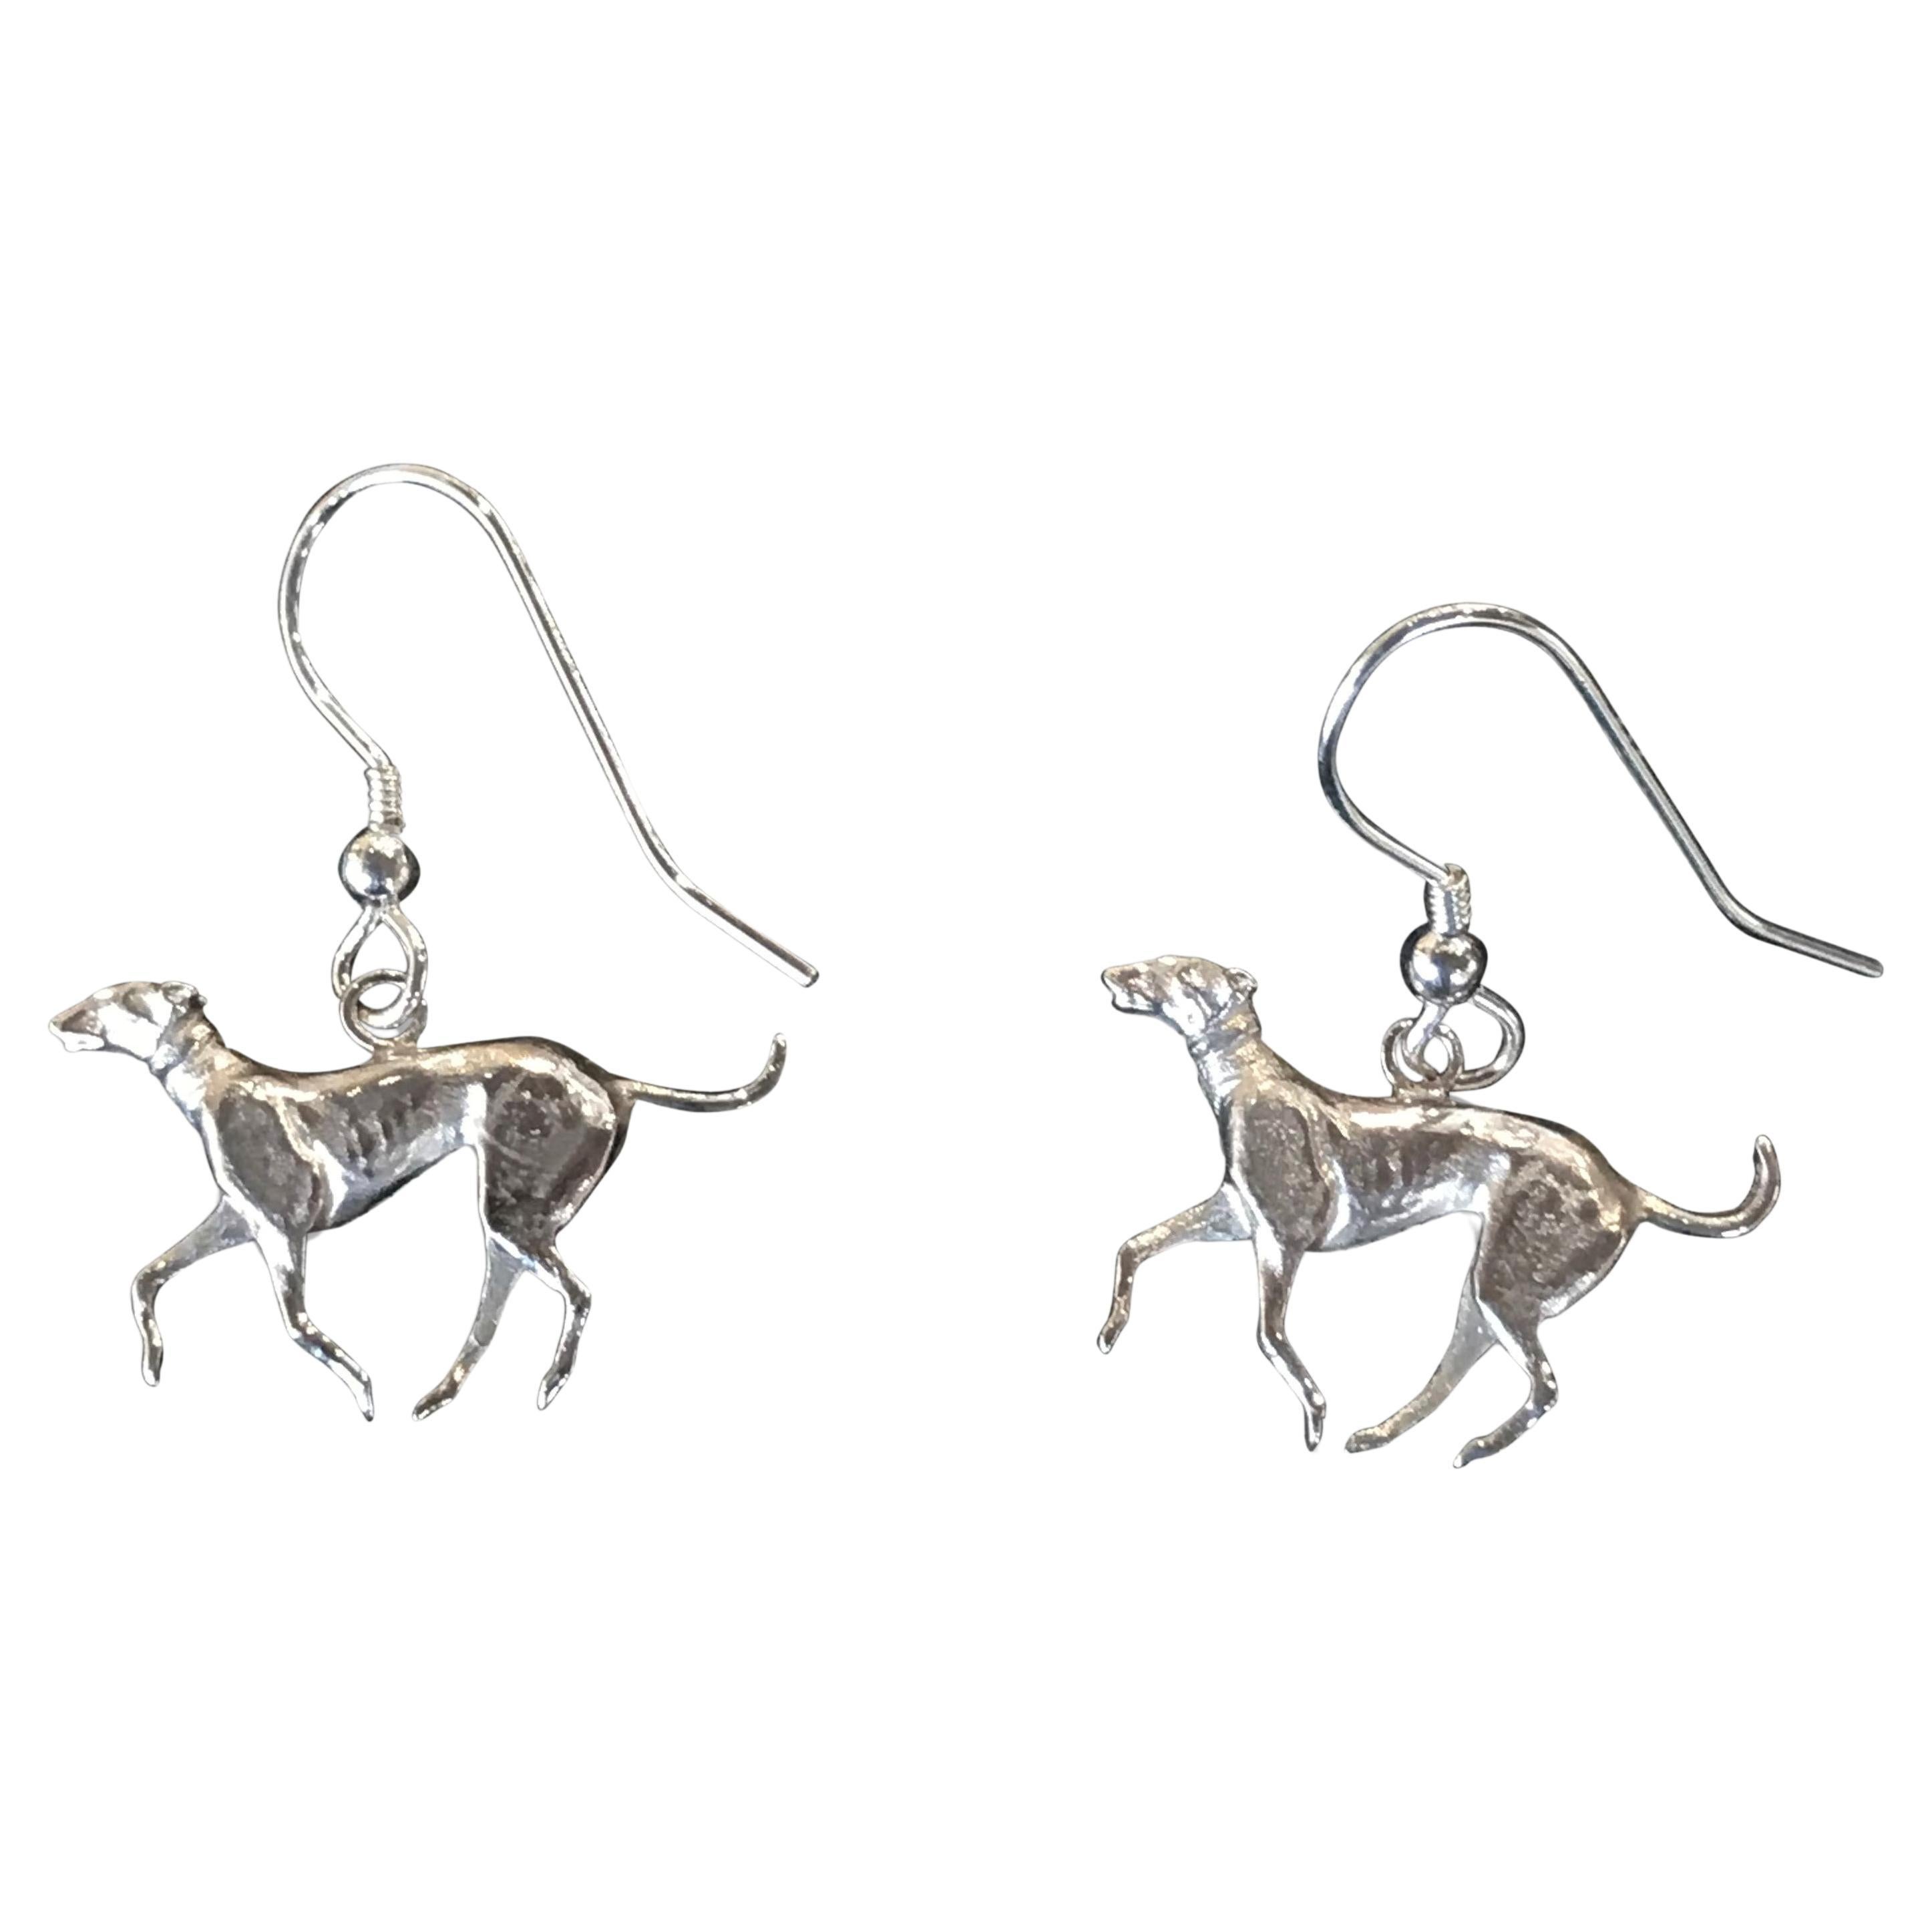 Paul Eaton Sculpted Flat Sterling Silver Greyhound Earrings For Sale